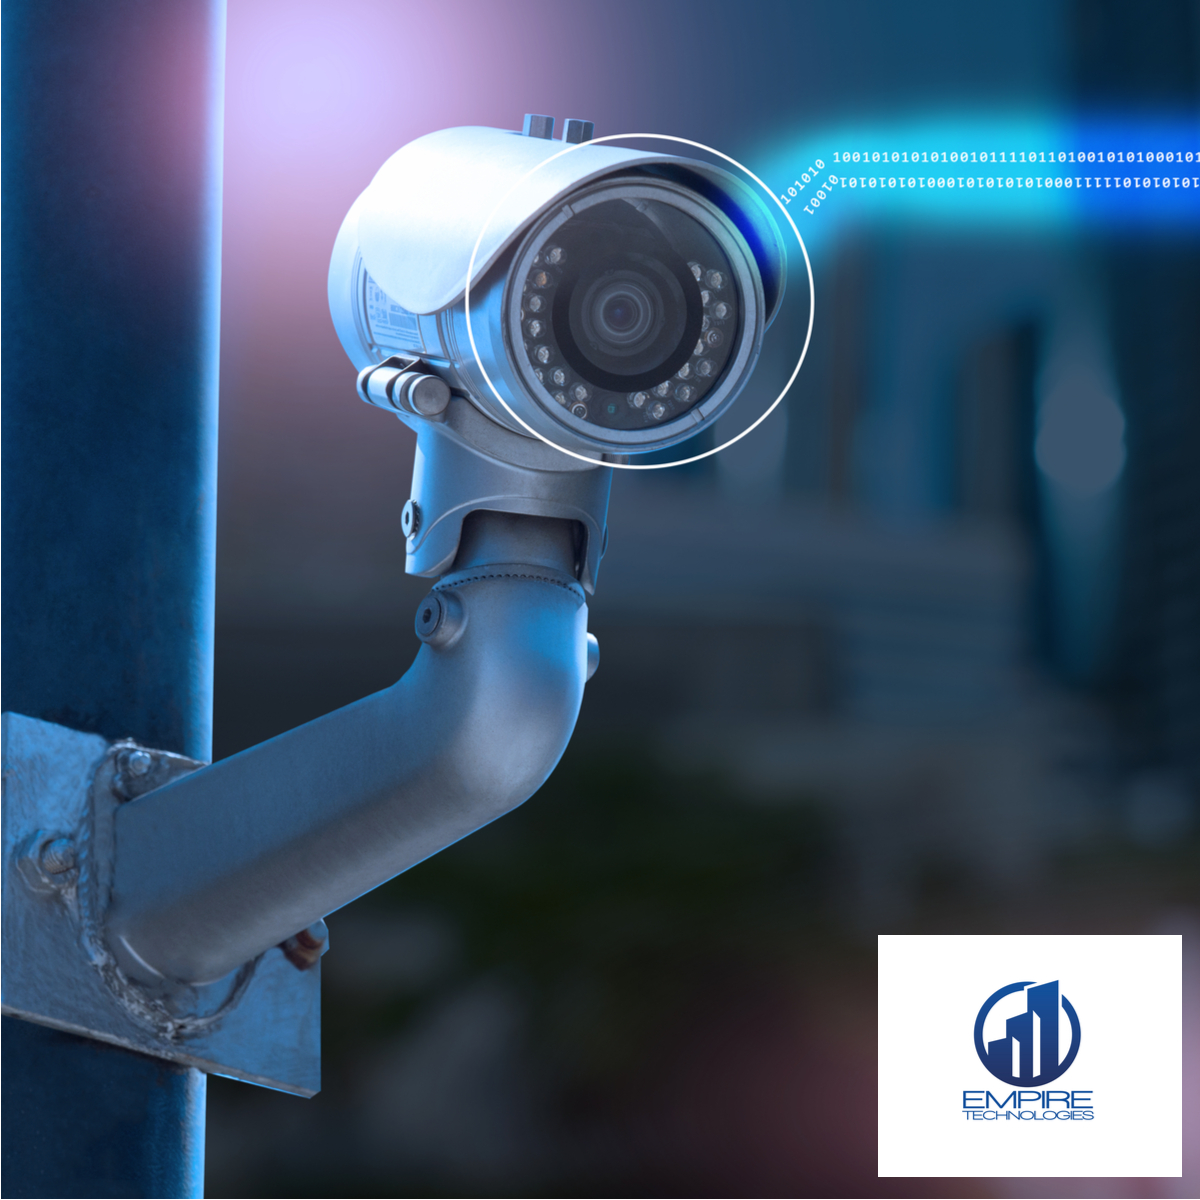 Call Empire Technologies for Reliable Installation of a CCTV Security Camera System